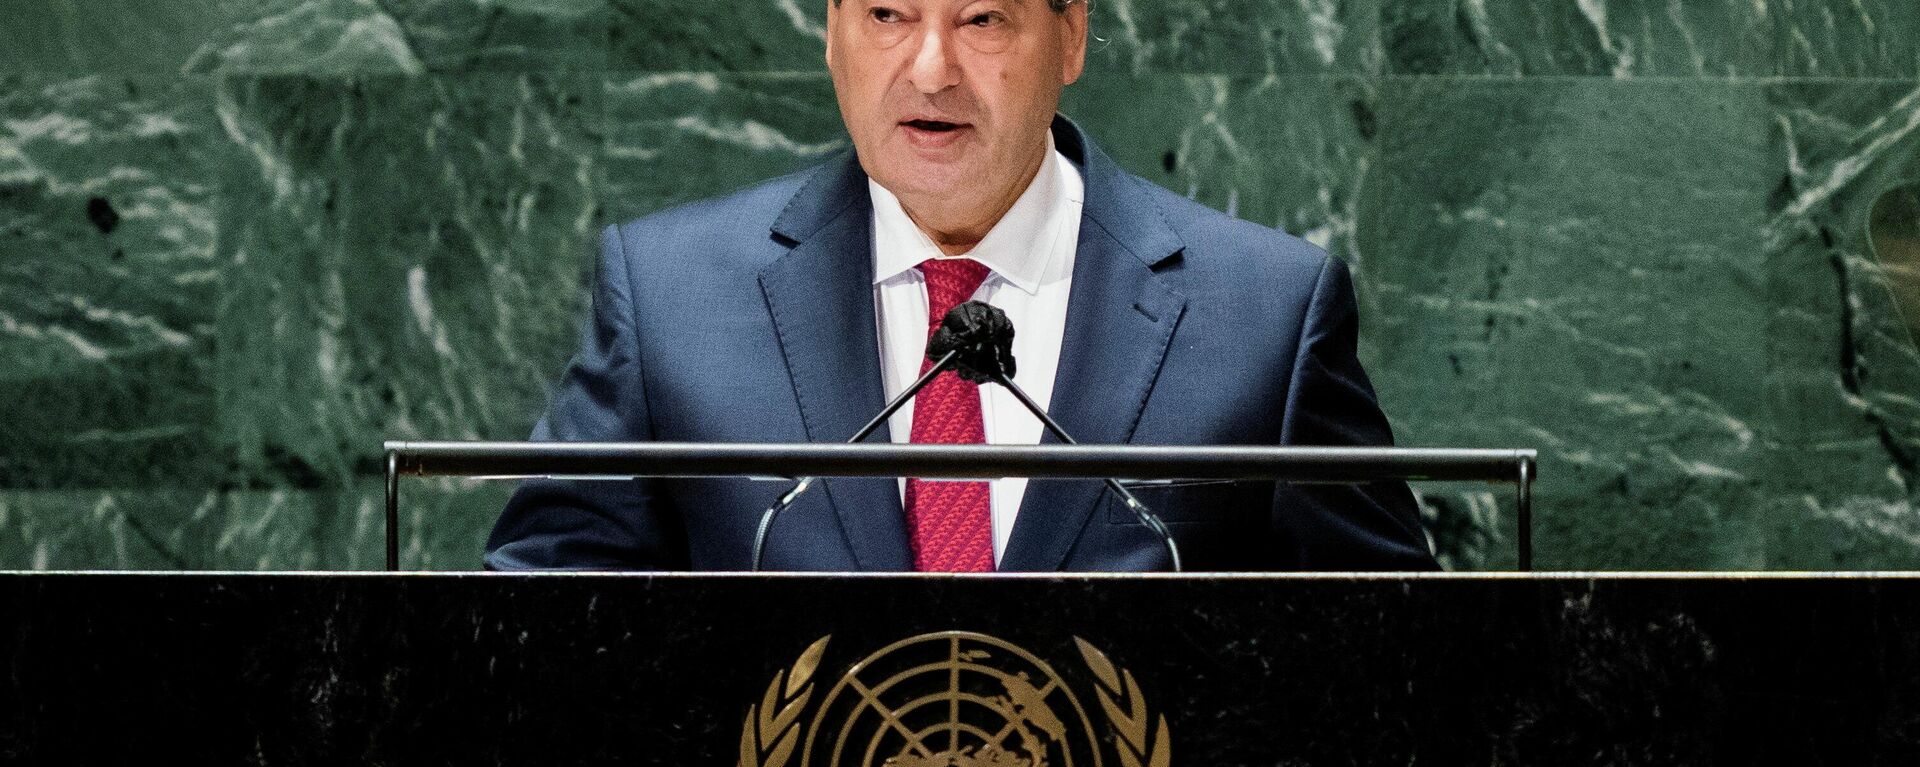 Syria’s foreign minister Faisal Mekdad addresses the 76th Session of the United Nations General Assembly, at the U.N. headquarters in New York, U.S., September 27, 2021 - Sputnik International, 1920, 27.09.2021